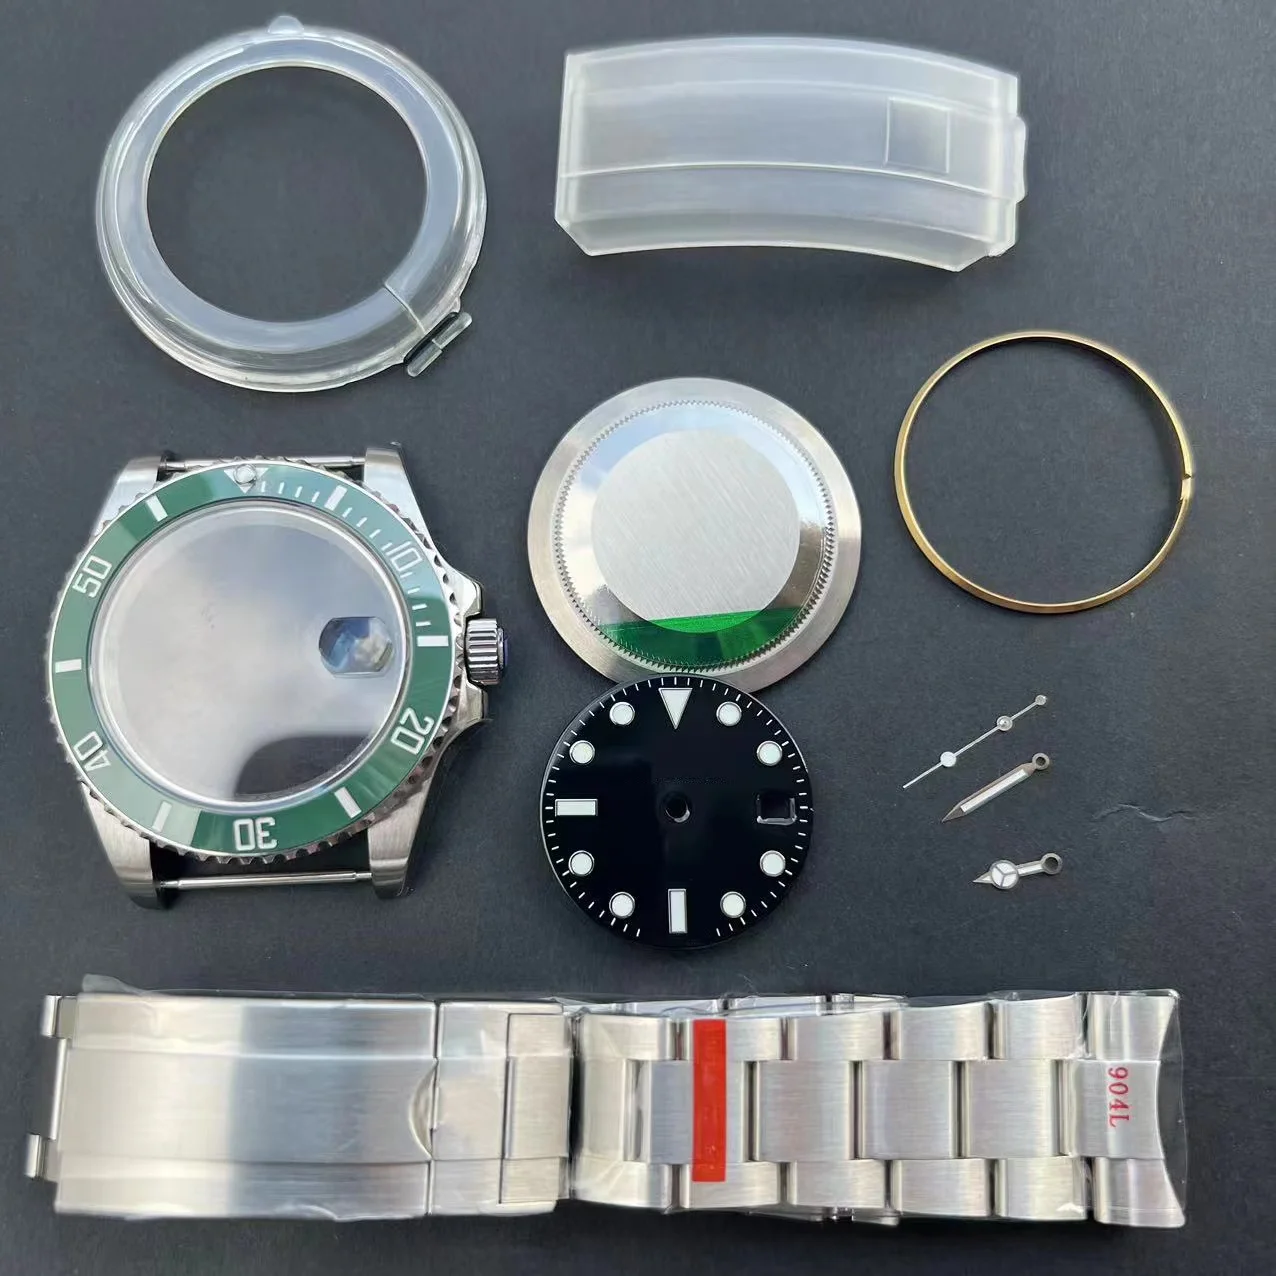 

41mm Assemble Watch Case Set for 2824 2836-2 3235 Movement Stainless Steel Case Sapphire glass,Dial,Bracelet,Hands 126610